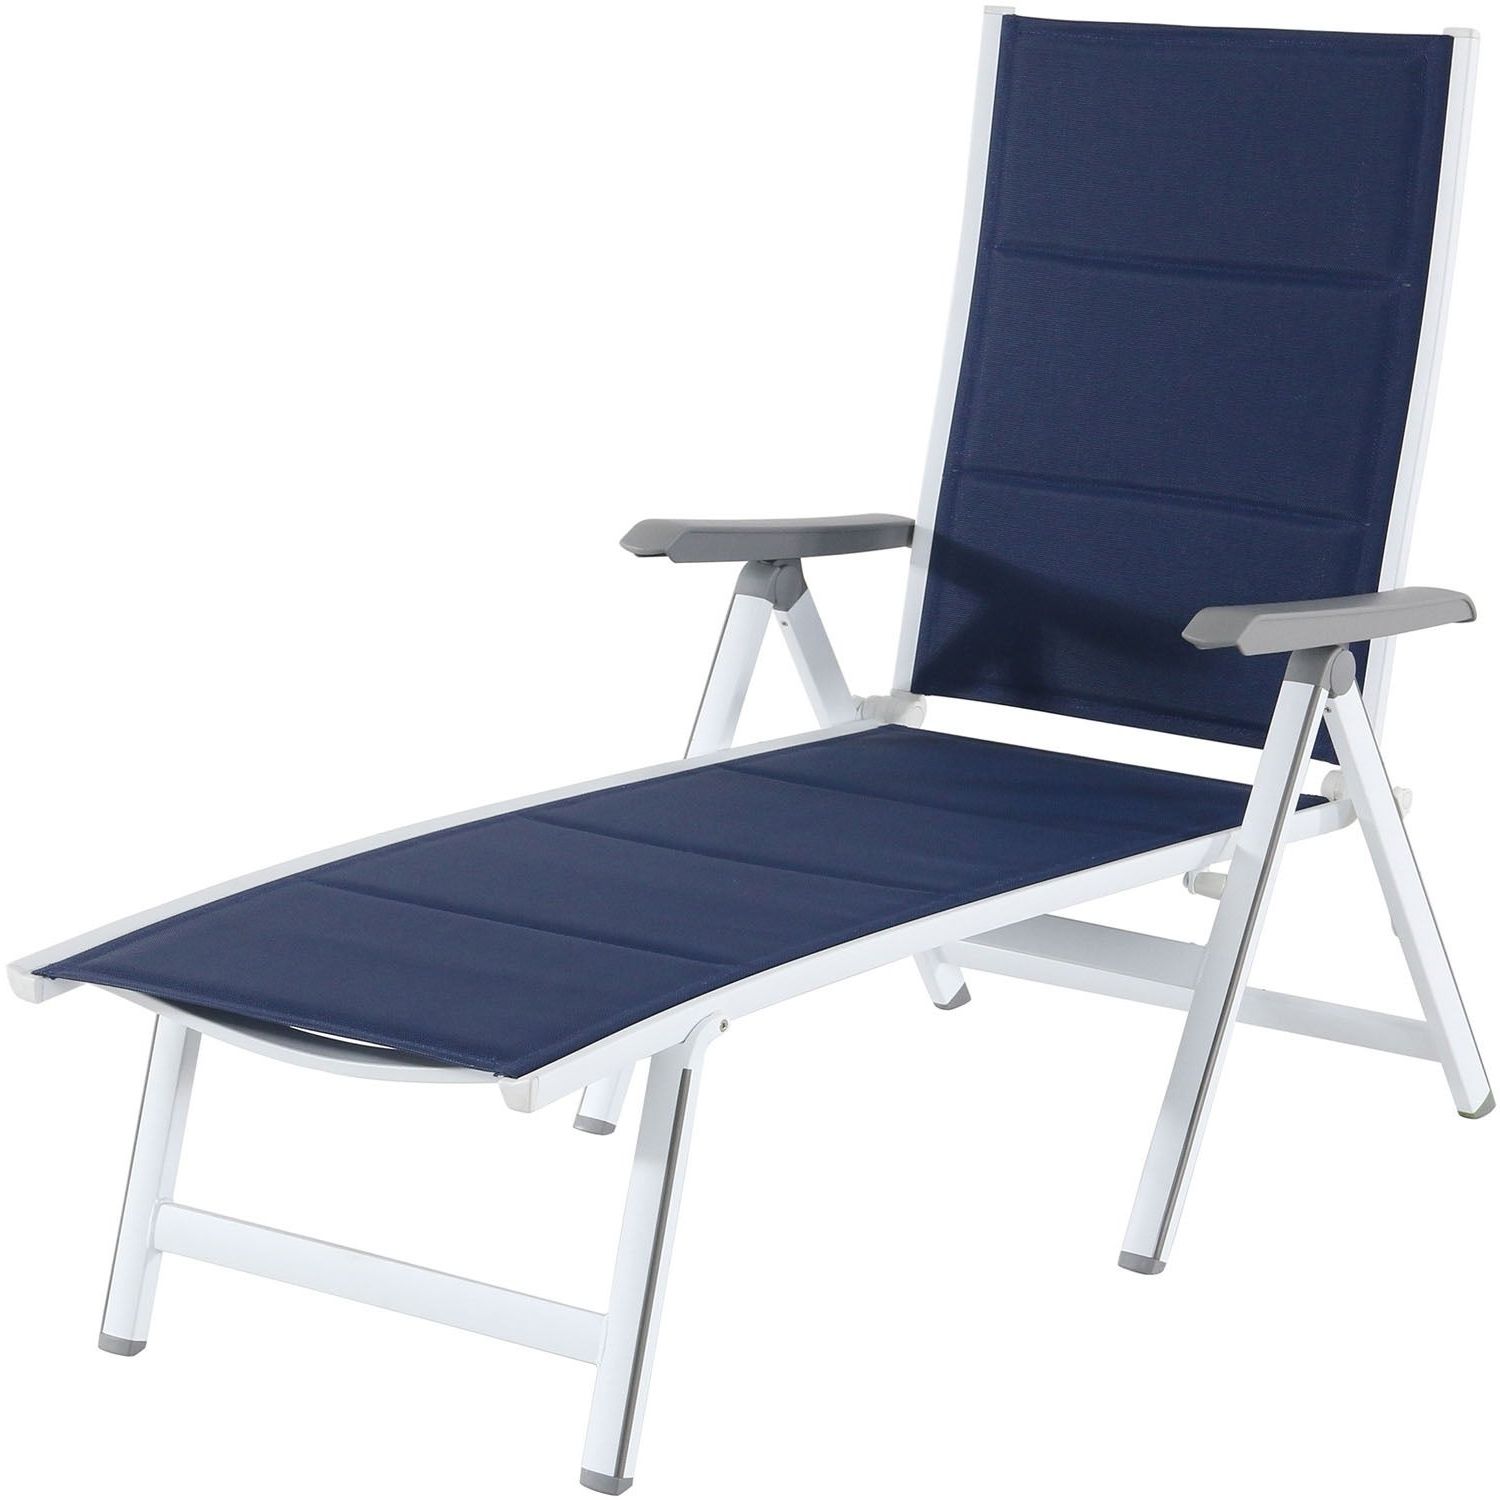 Fashionable Hanover Regis White/navy Aluminum Padded Sling Chaise Lounge Chair Regarding Hanover Halsted Padded Chaises (View 15 of 25)